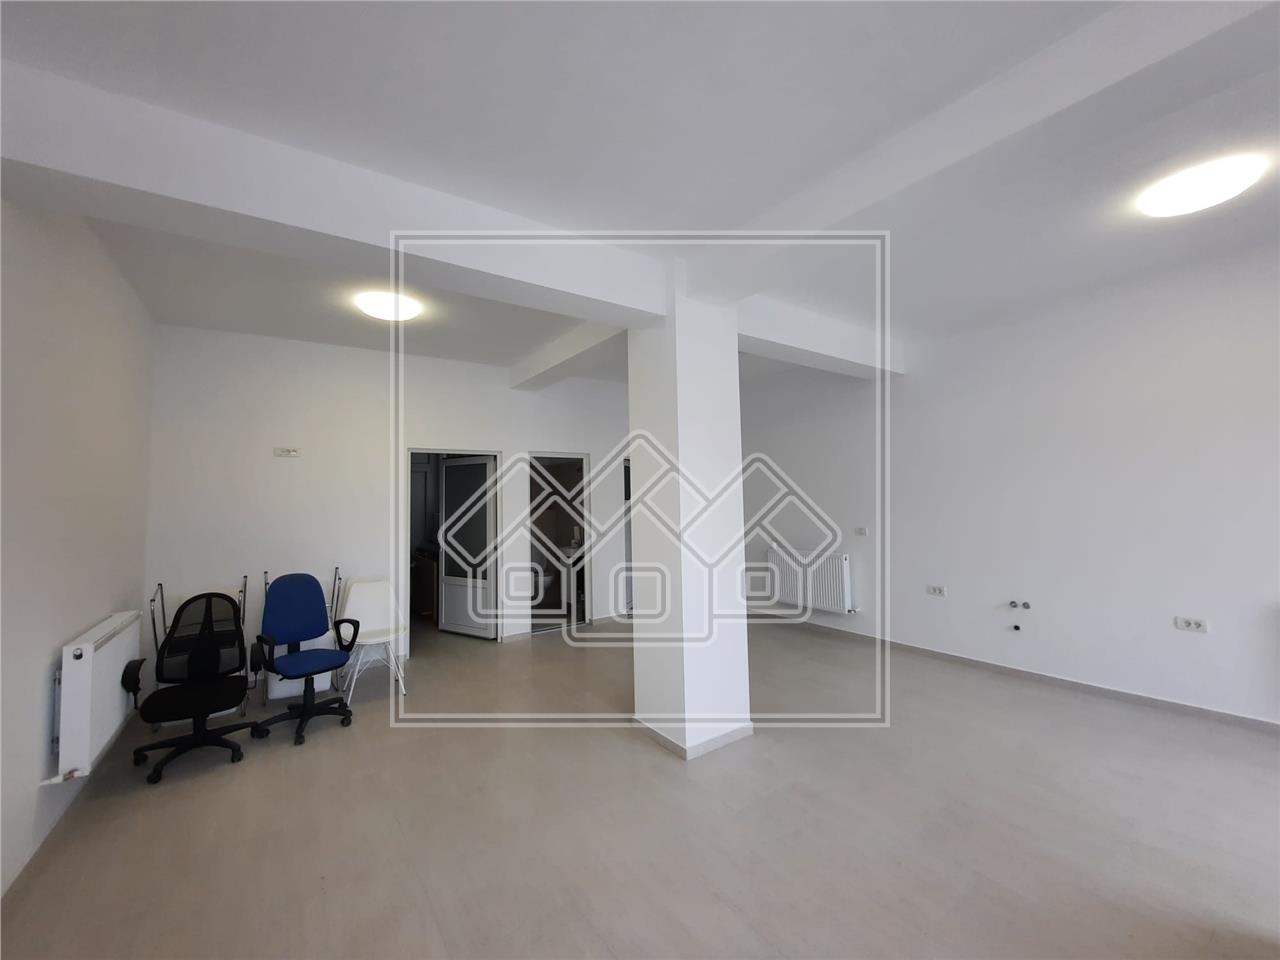 Commercial space in Alba Iulia, suitable for offices or medical office